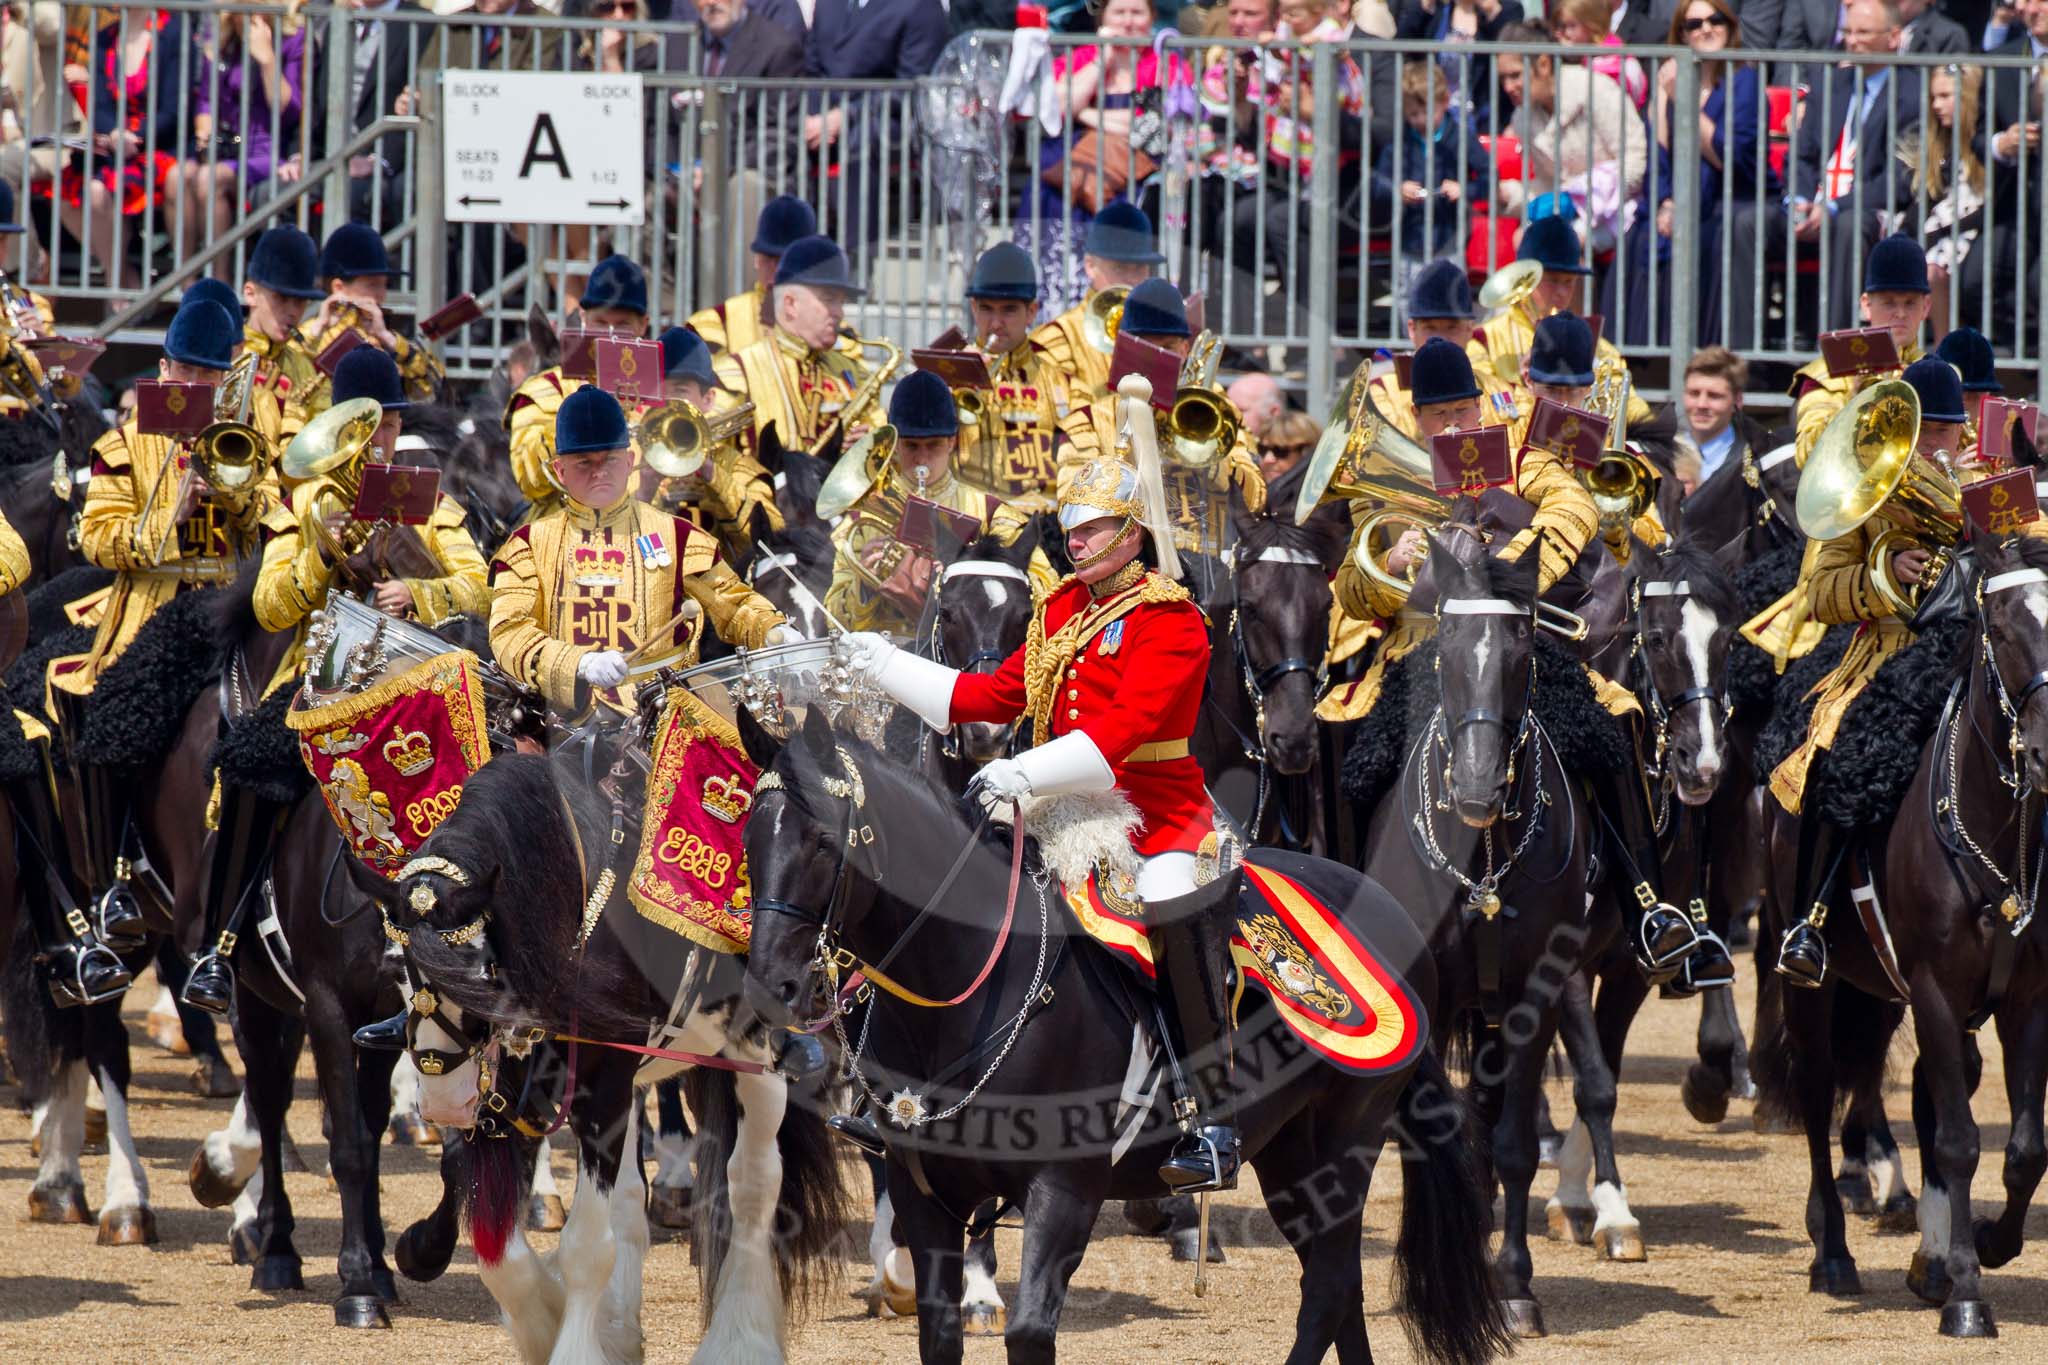 Trooping the Colour 2011: The Mounted Bands of the Household Cavalry moving onto the parade ground.   In red Major K L Davies, The Life Guards, Director of Music, on his right one of the two kettle drummers..
Horse Guards Parade, Westminster,
London SW1,
Greater London,
United Kingdom,
on 11 June 2011 at 11:53, image #315